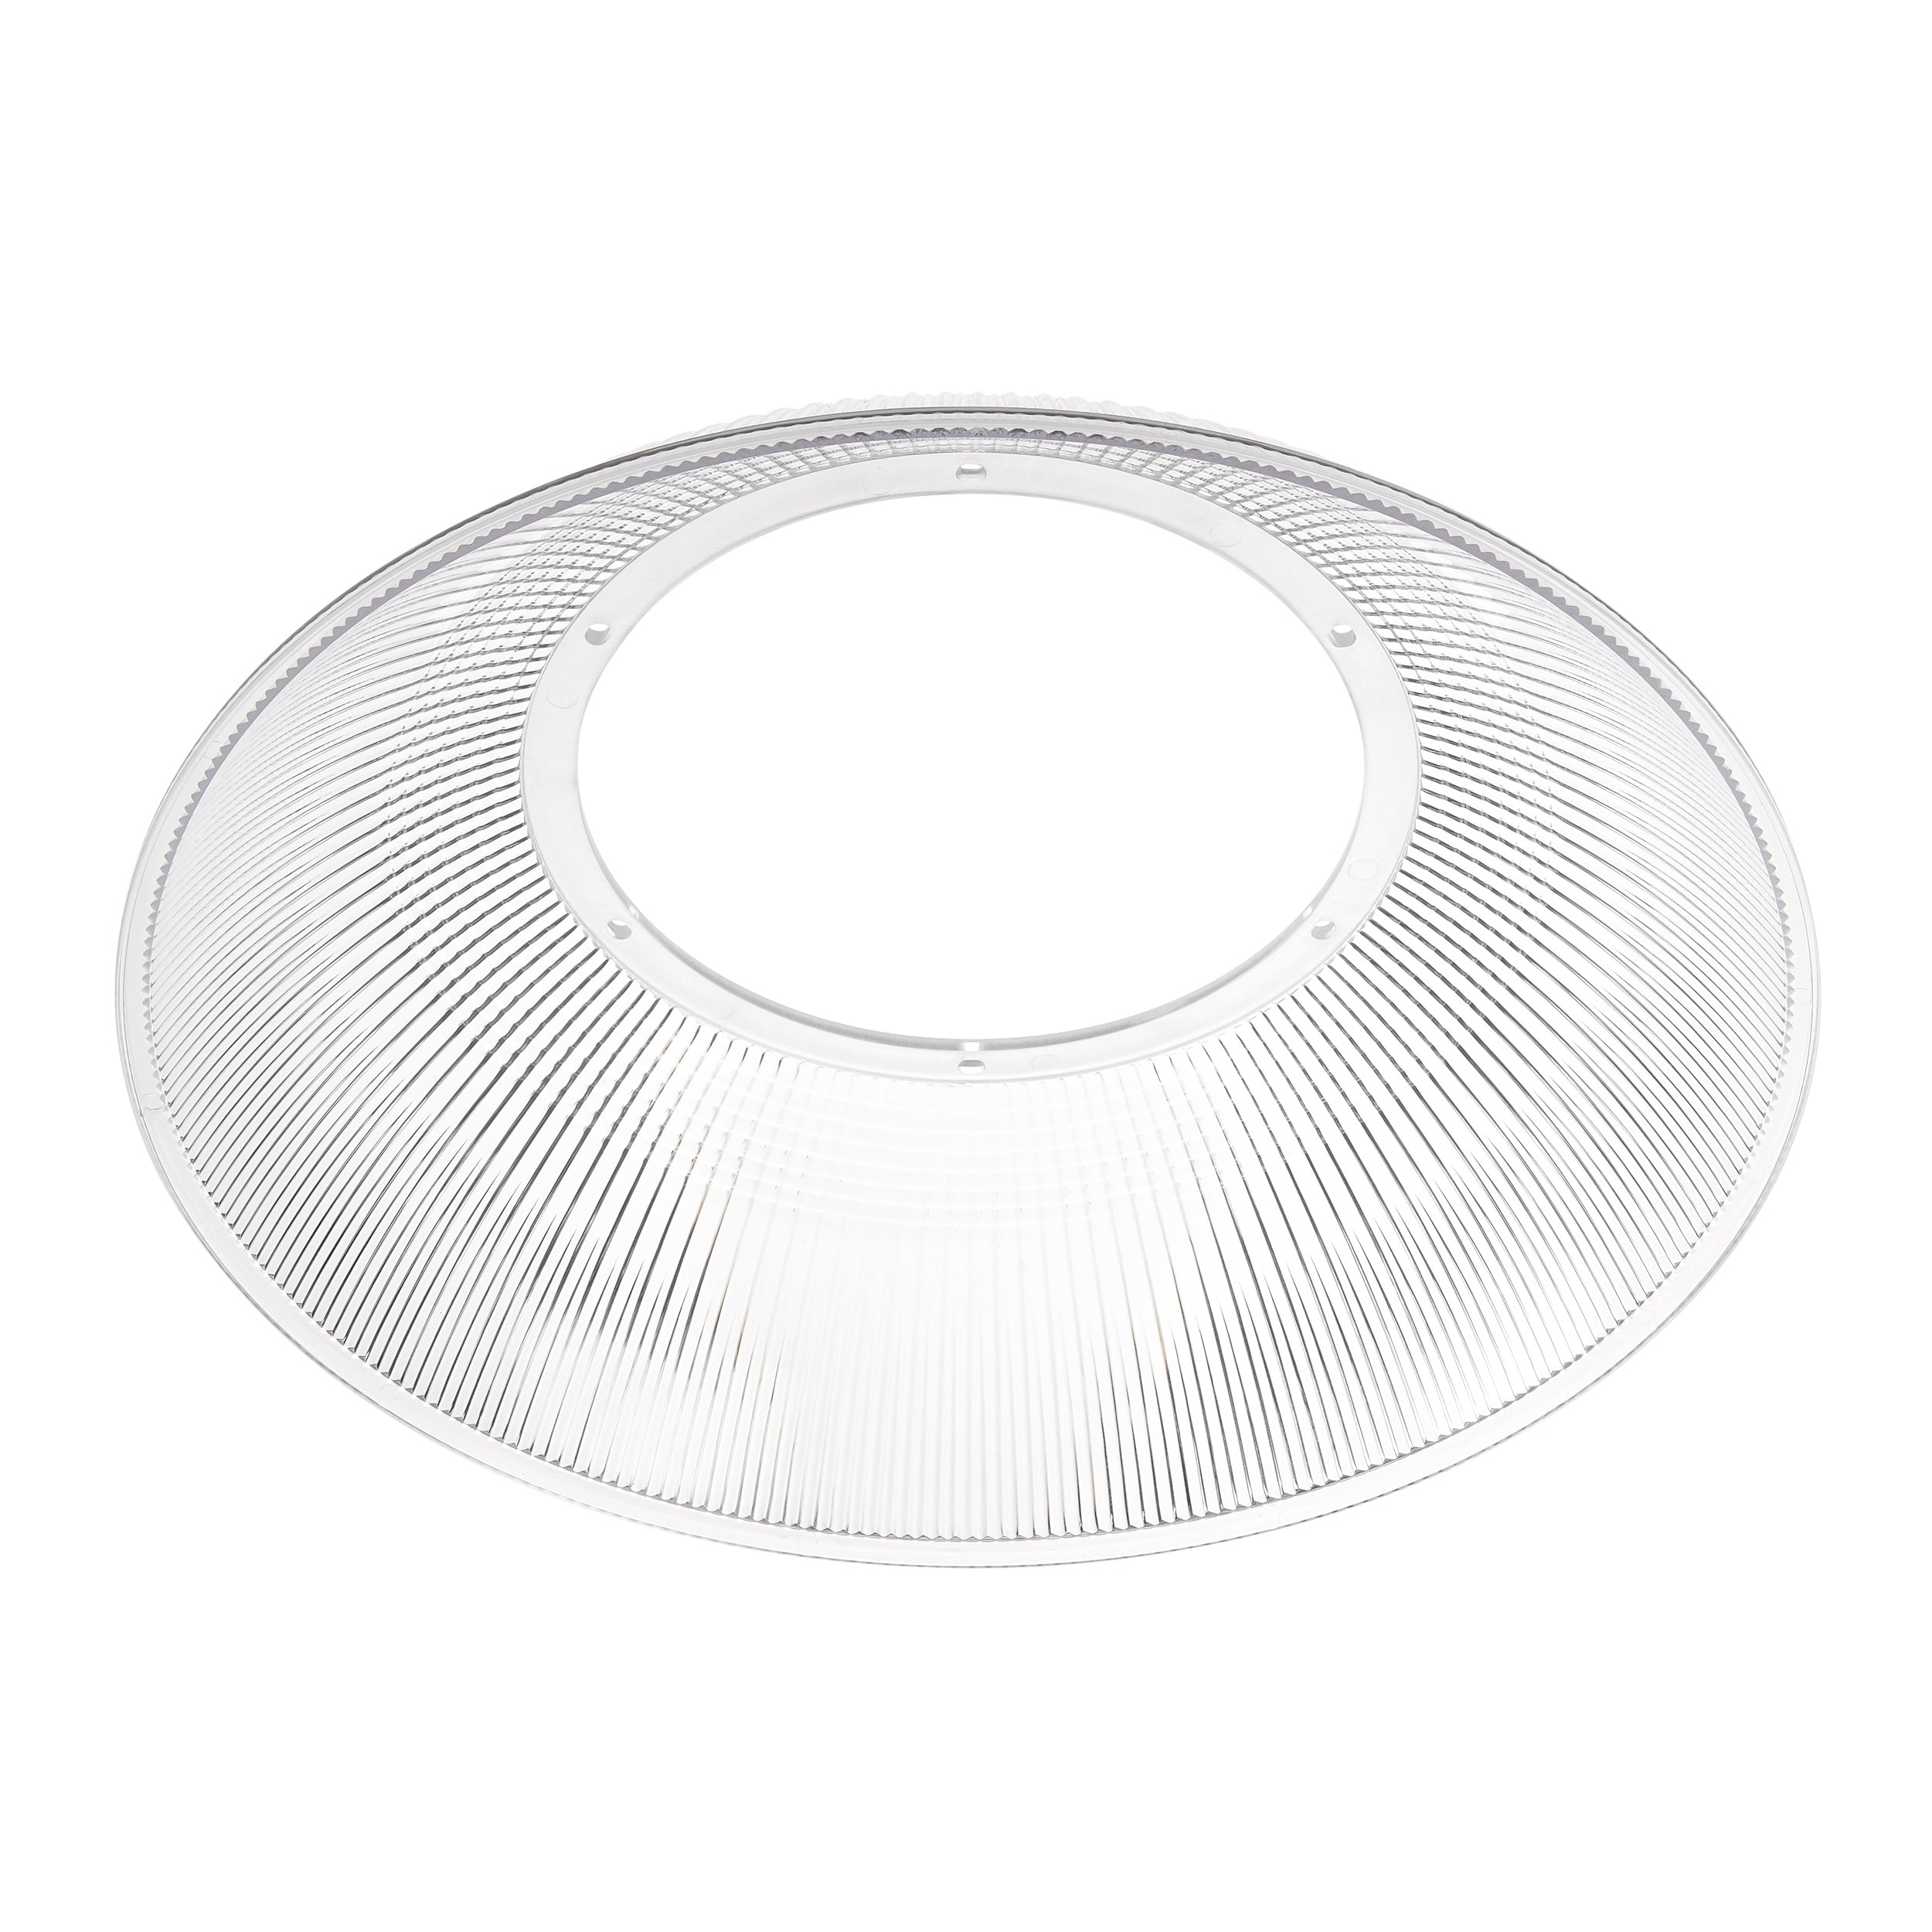 Helios Polycarbonate shade for 100W Helios Highbay Lights